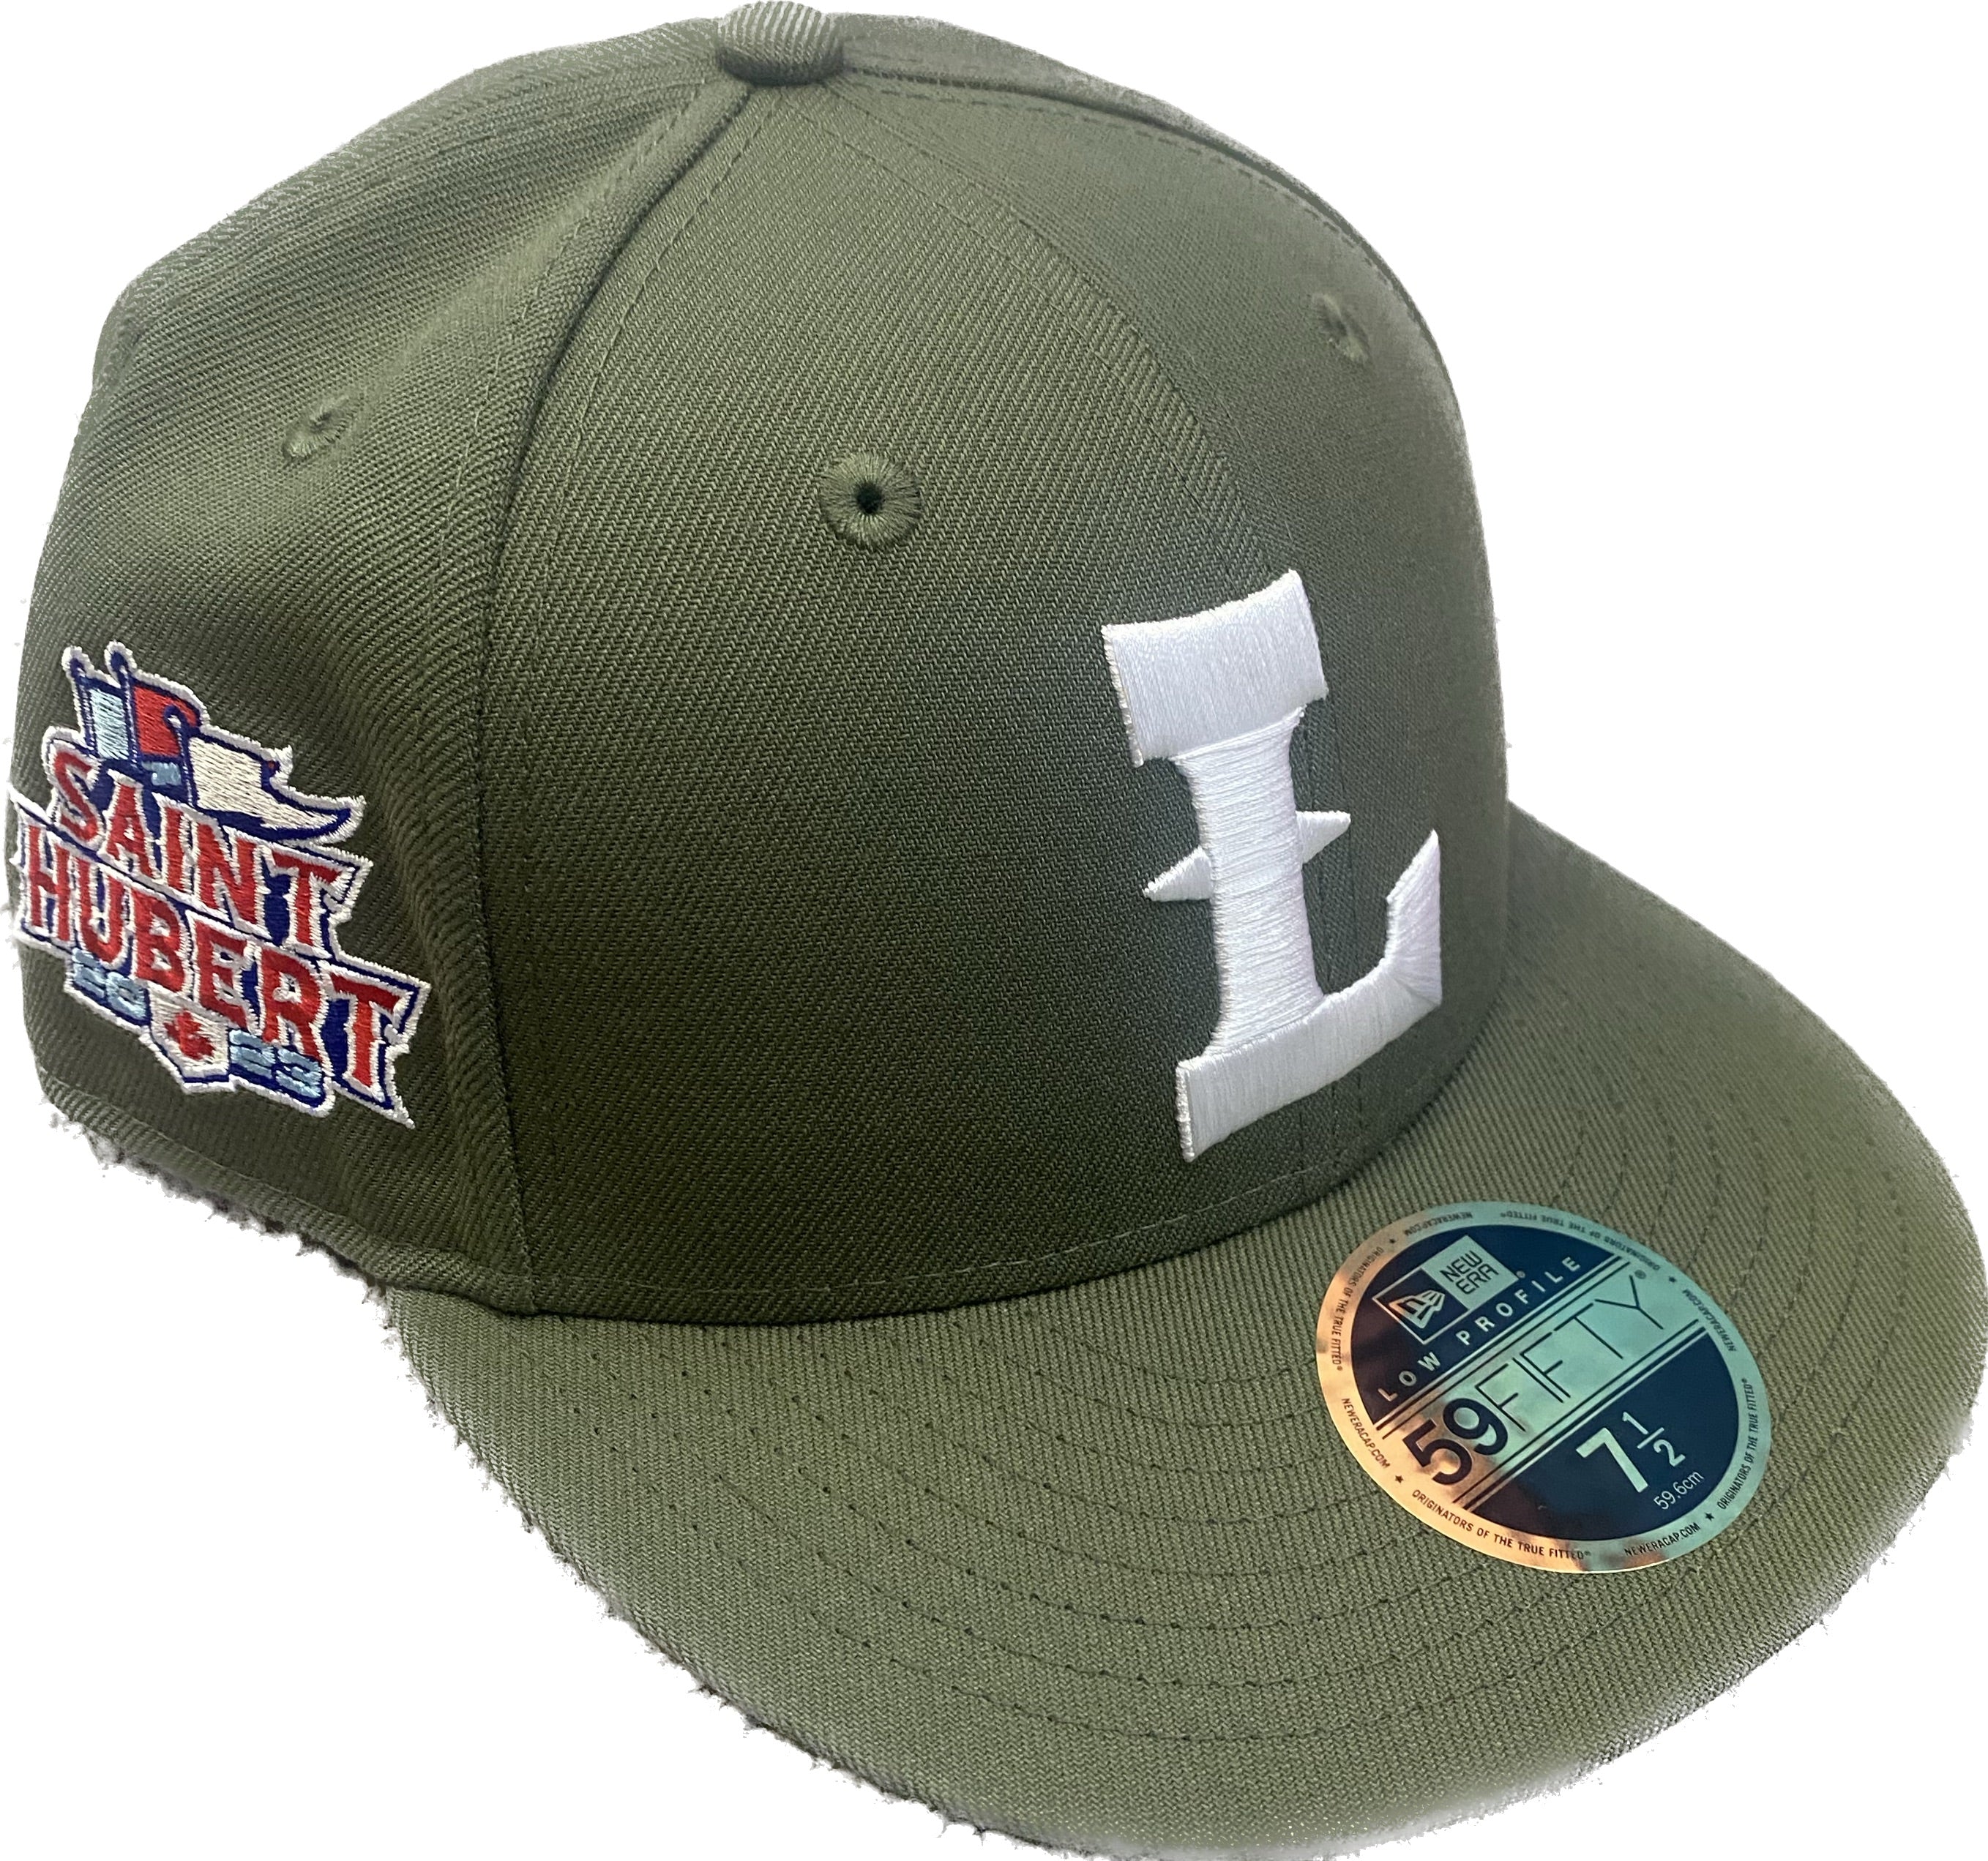 New Era x Lopez 59-Fifty Fitted Cap - Green